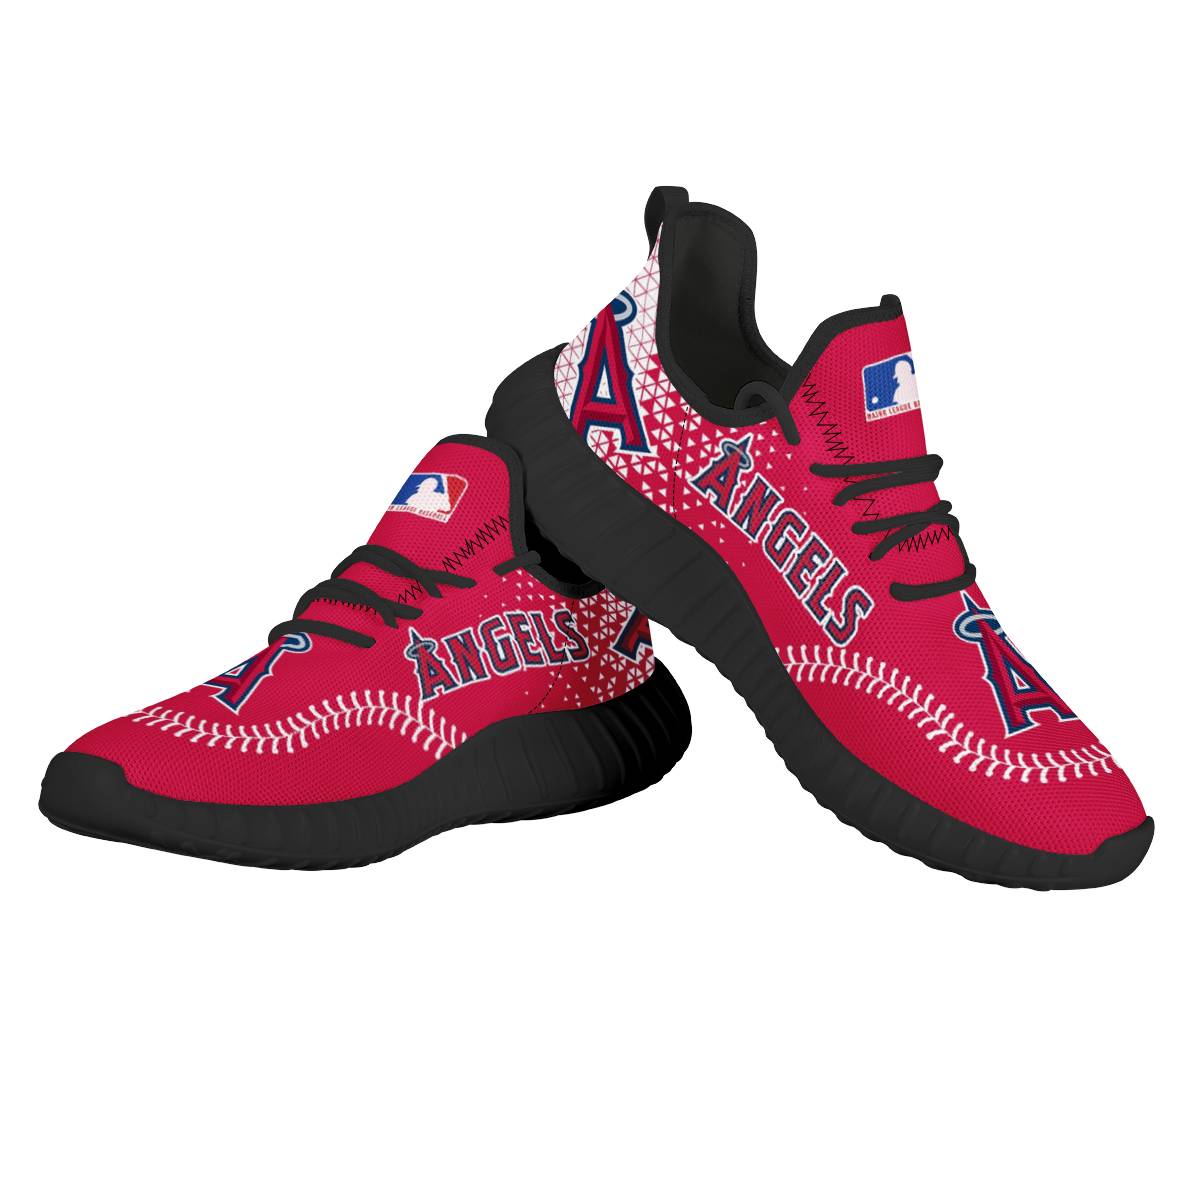 Los Angeles Angels shoes